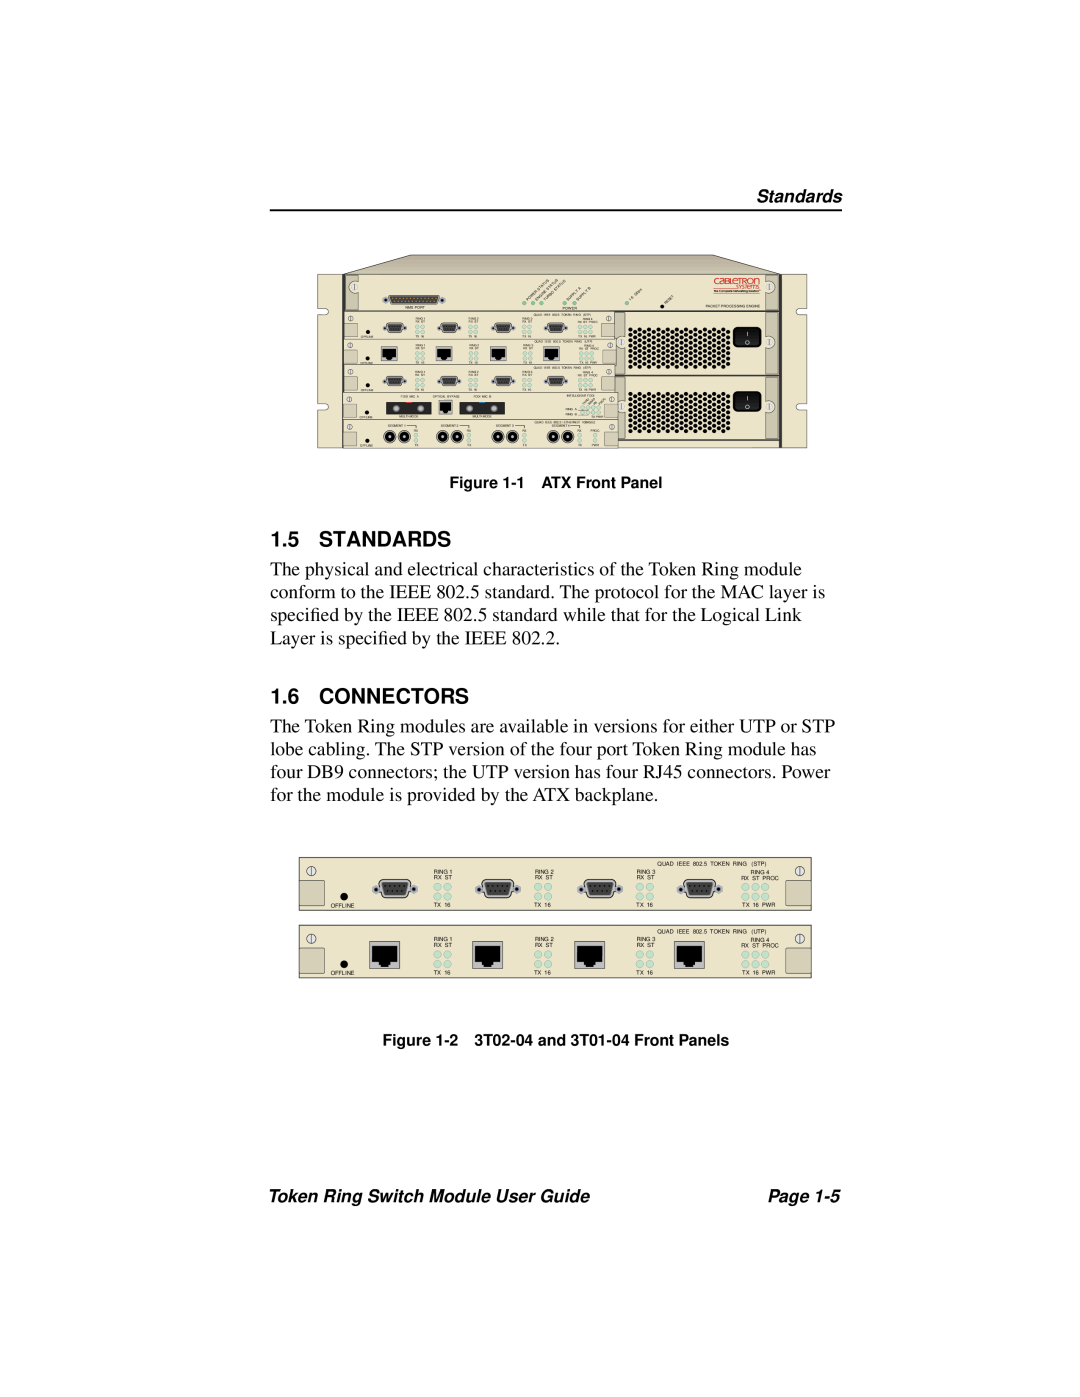 Cabletron Systems manual Standards, Connectors, 1 ATX Front Panel, 2 3T02-04 and 3T01-04 Front Panels 